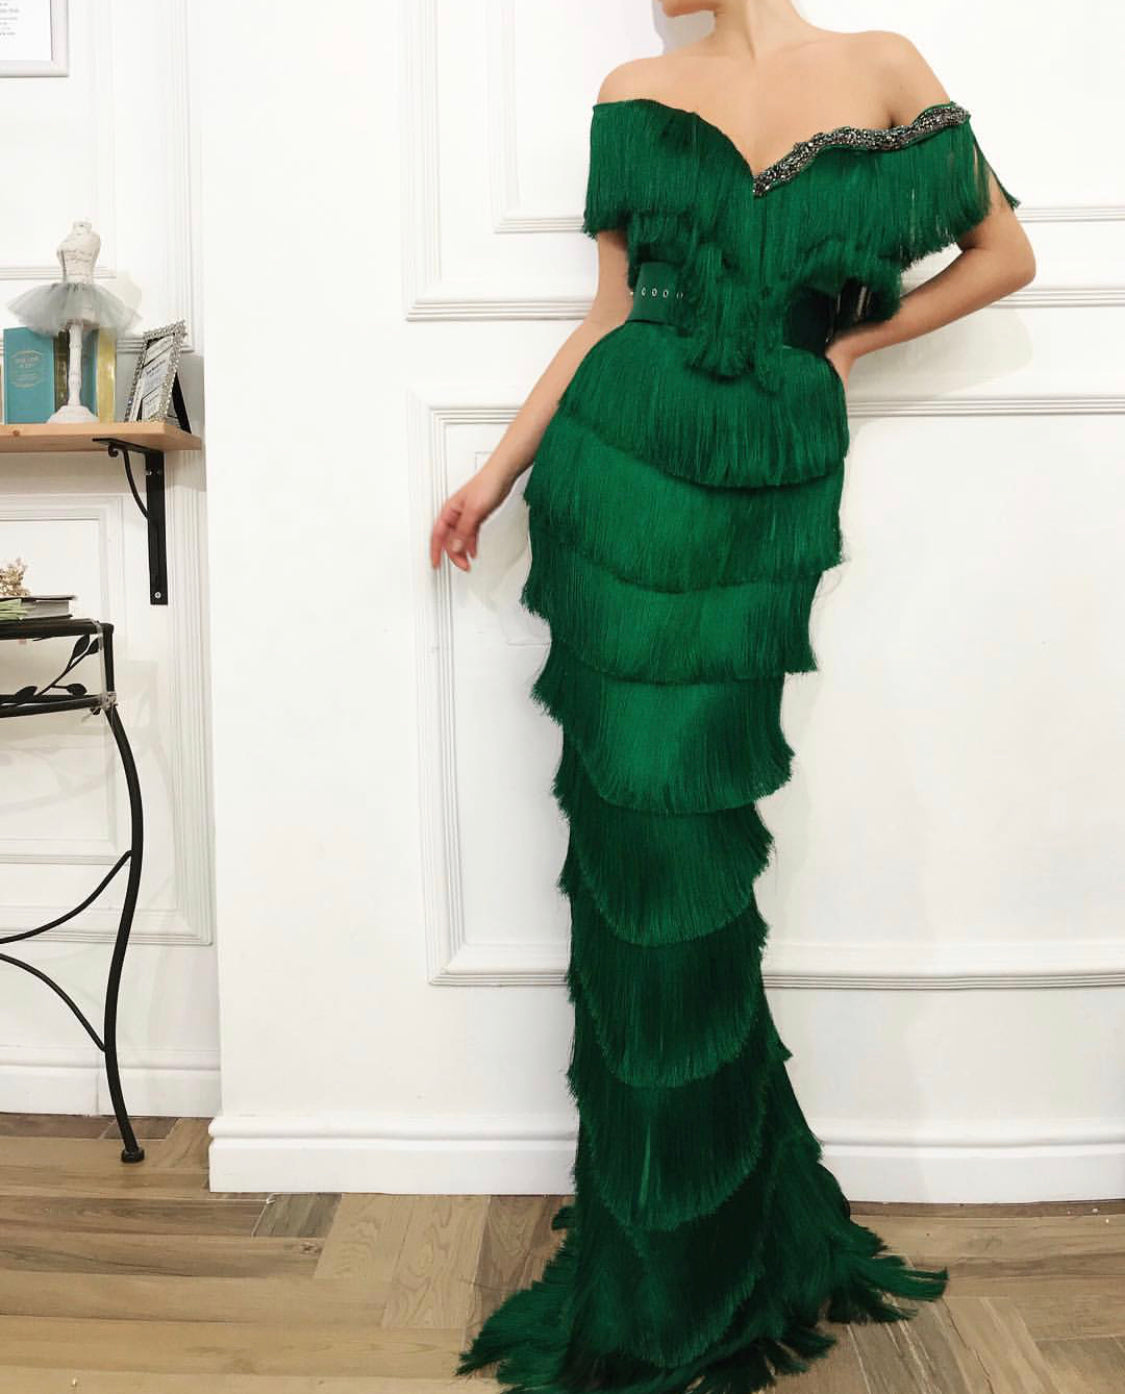 Green fringe mermaid dress with embroidery, off the shoulder sleeves and belt